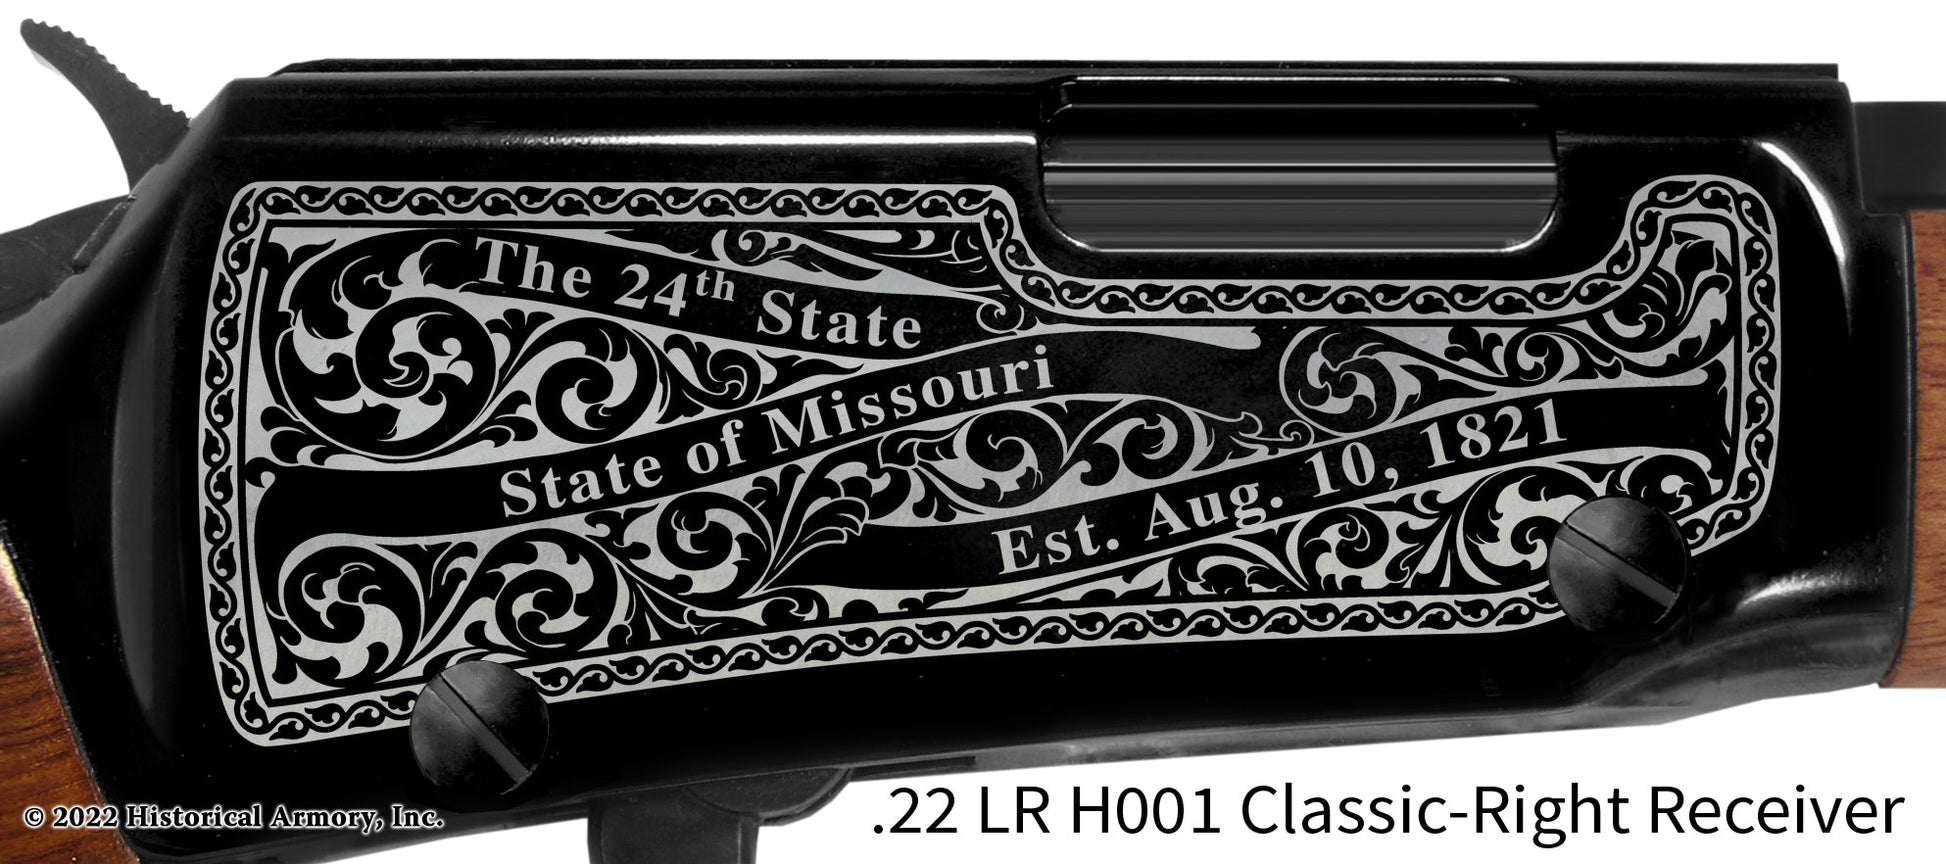 St. Clair County Missouri Engraved Henry H001 Rifle